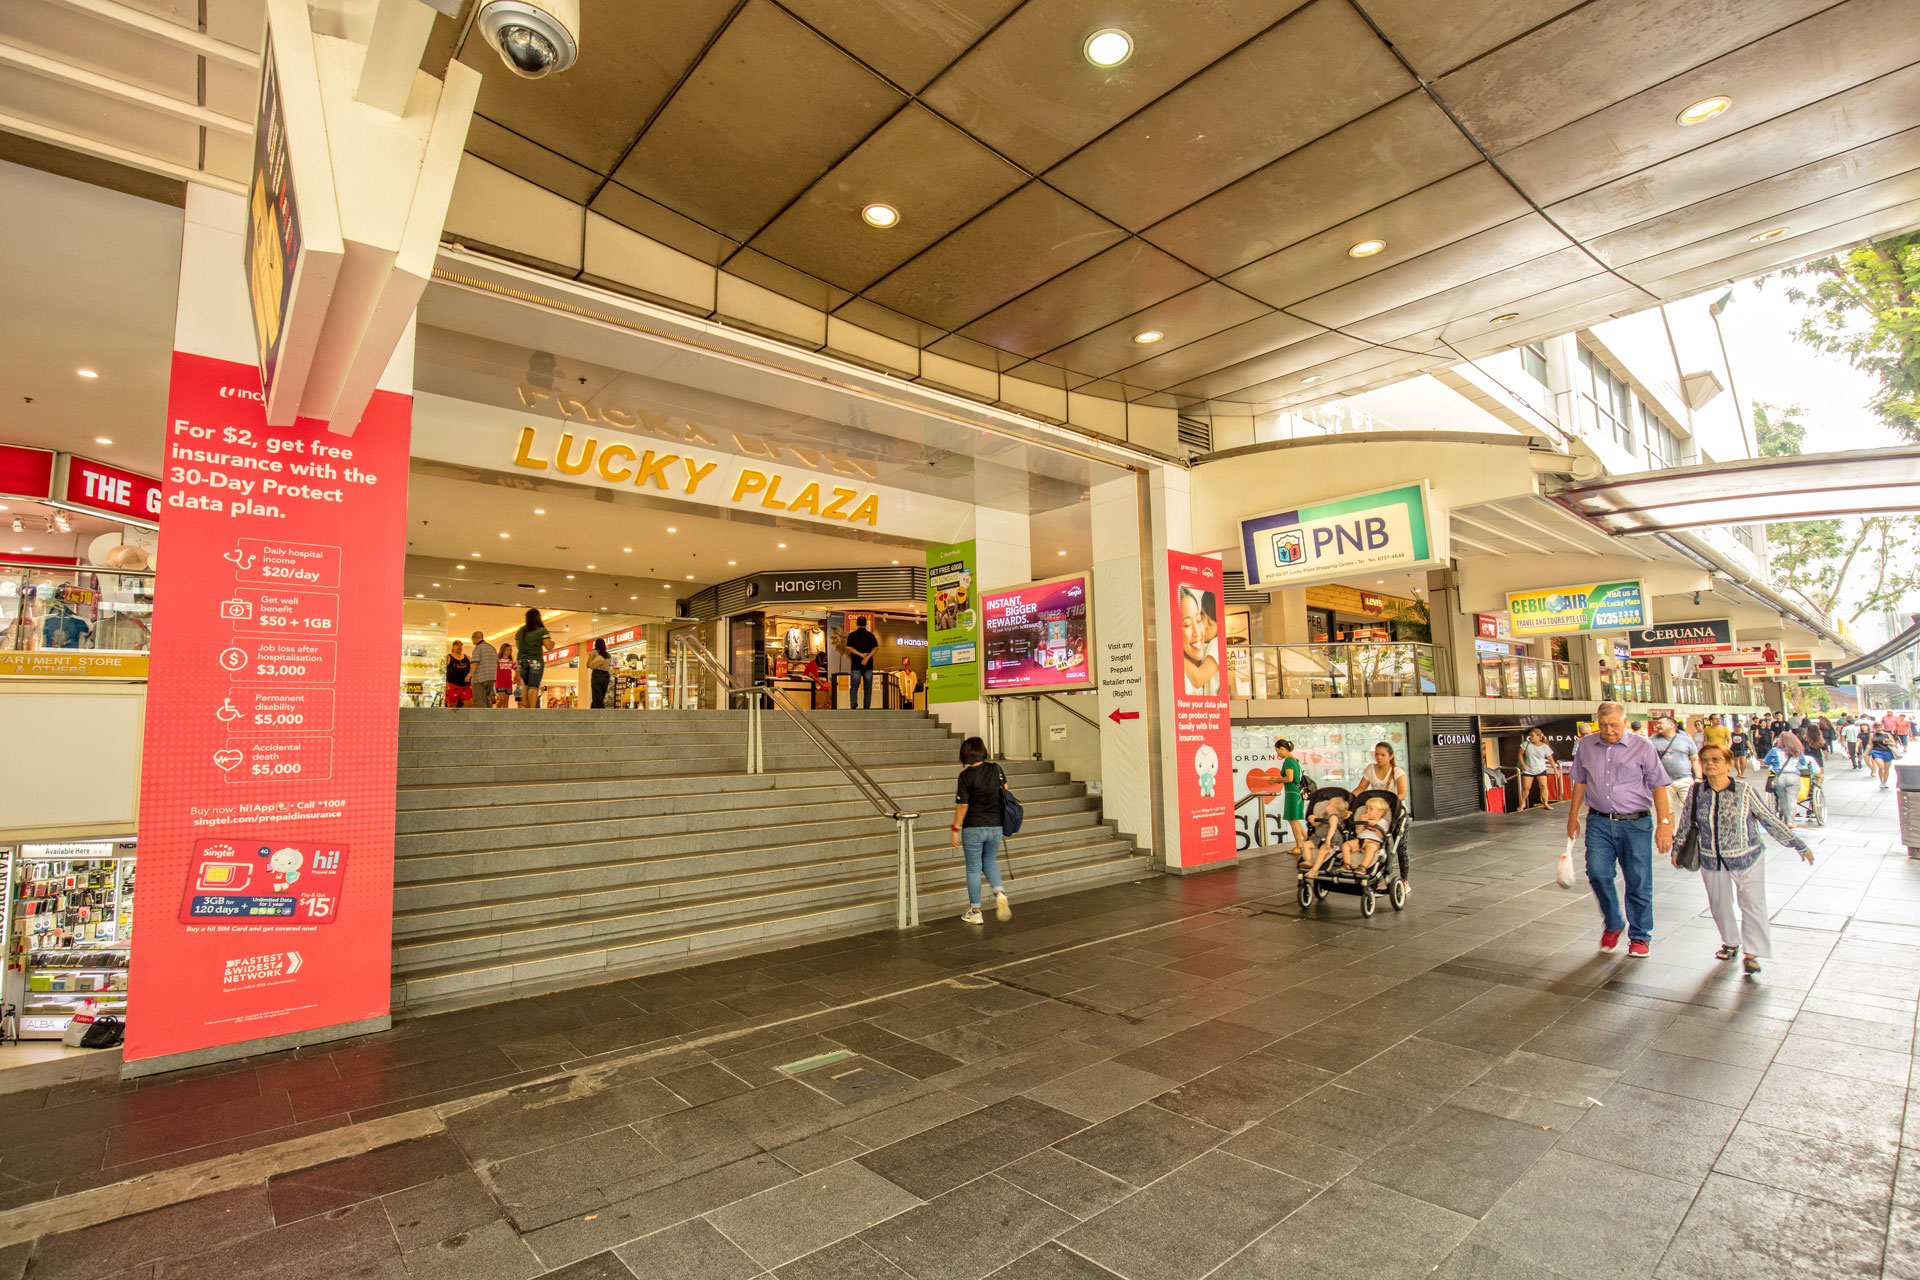 Shopping on a budget in Lucky Plaza